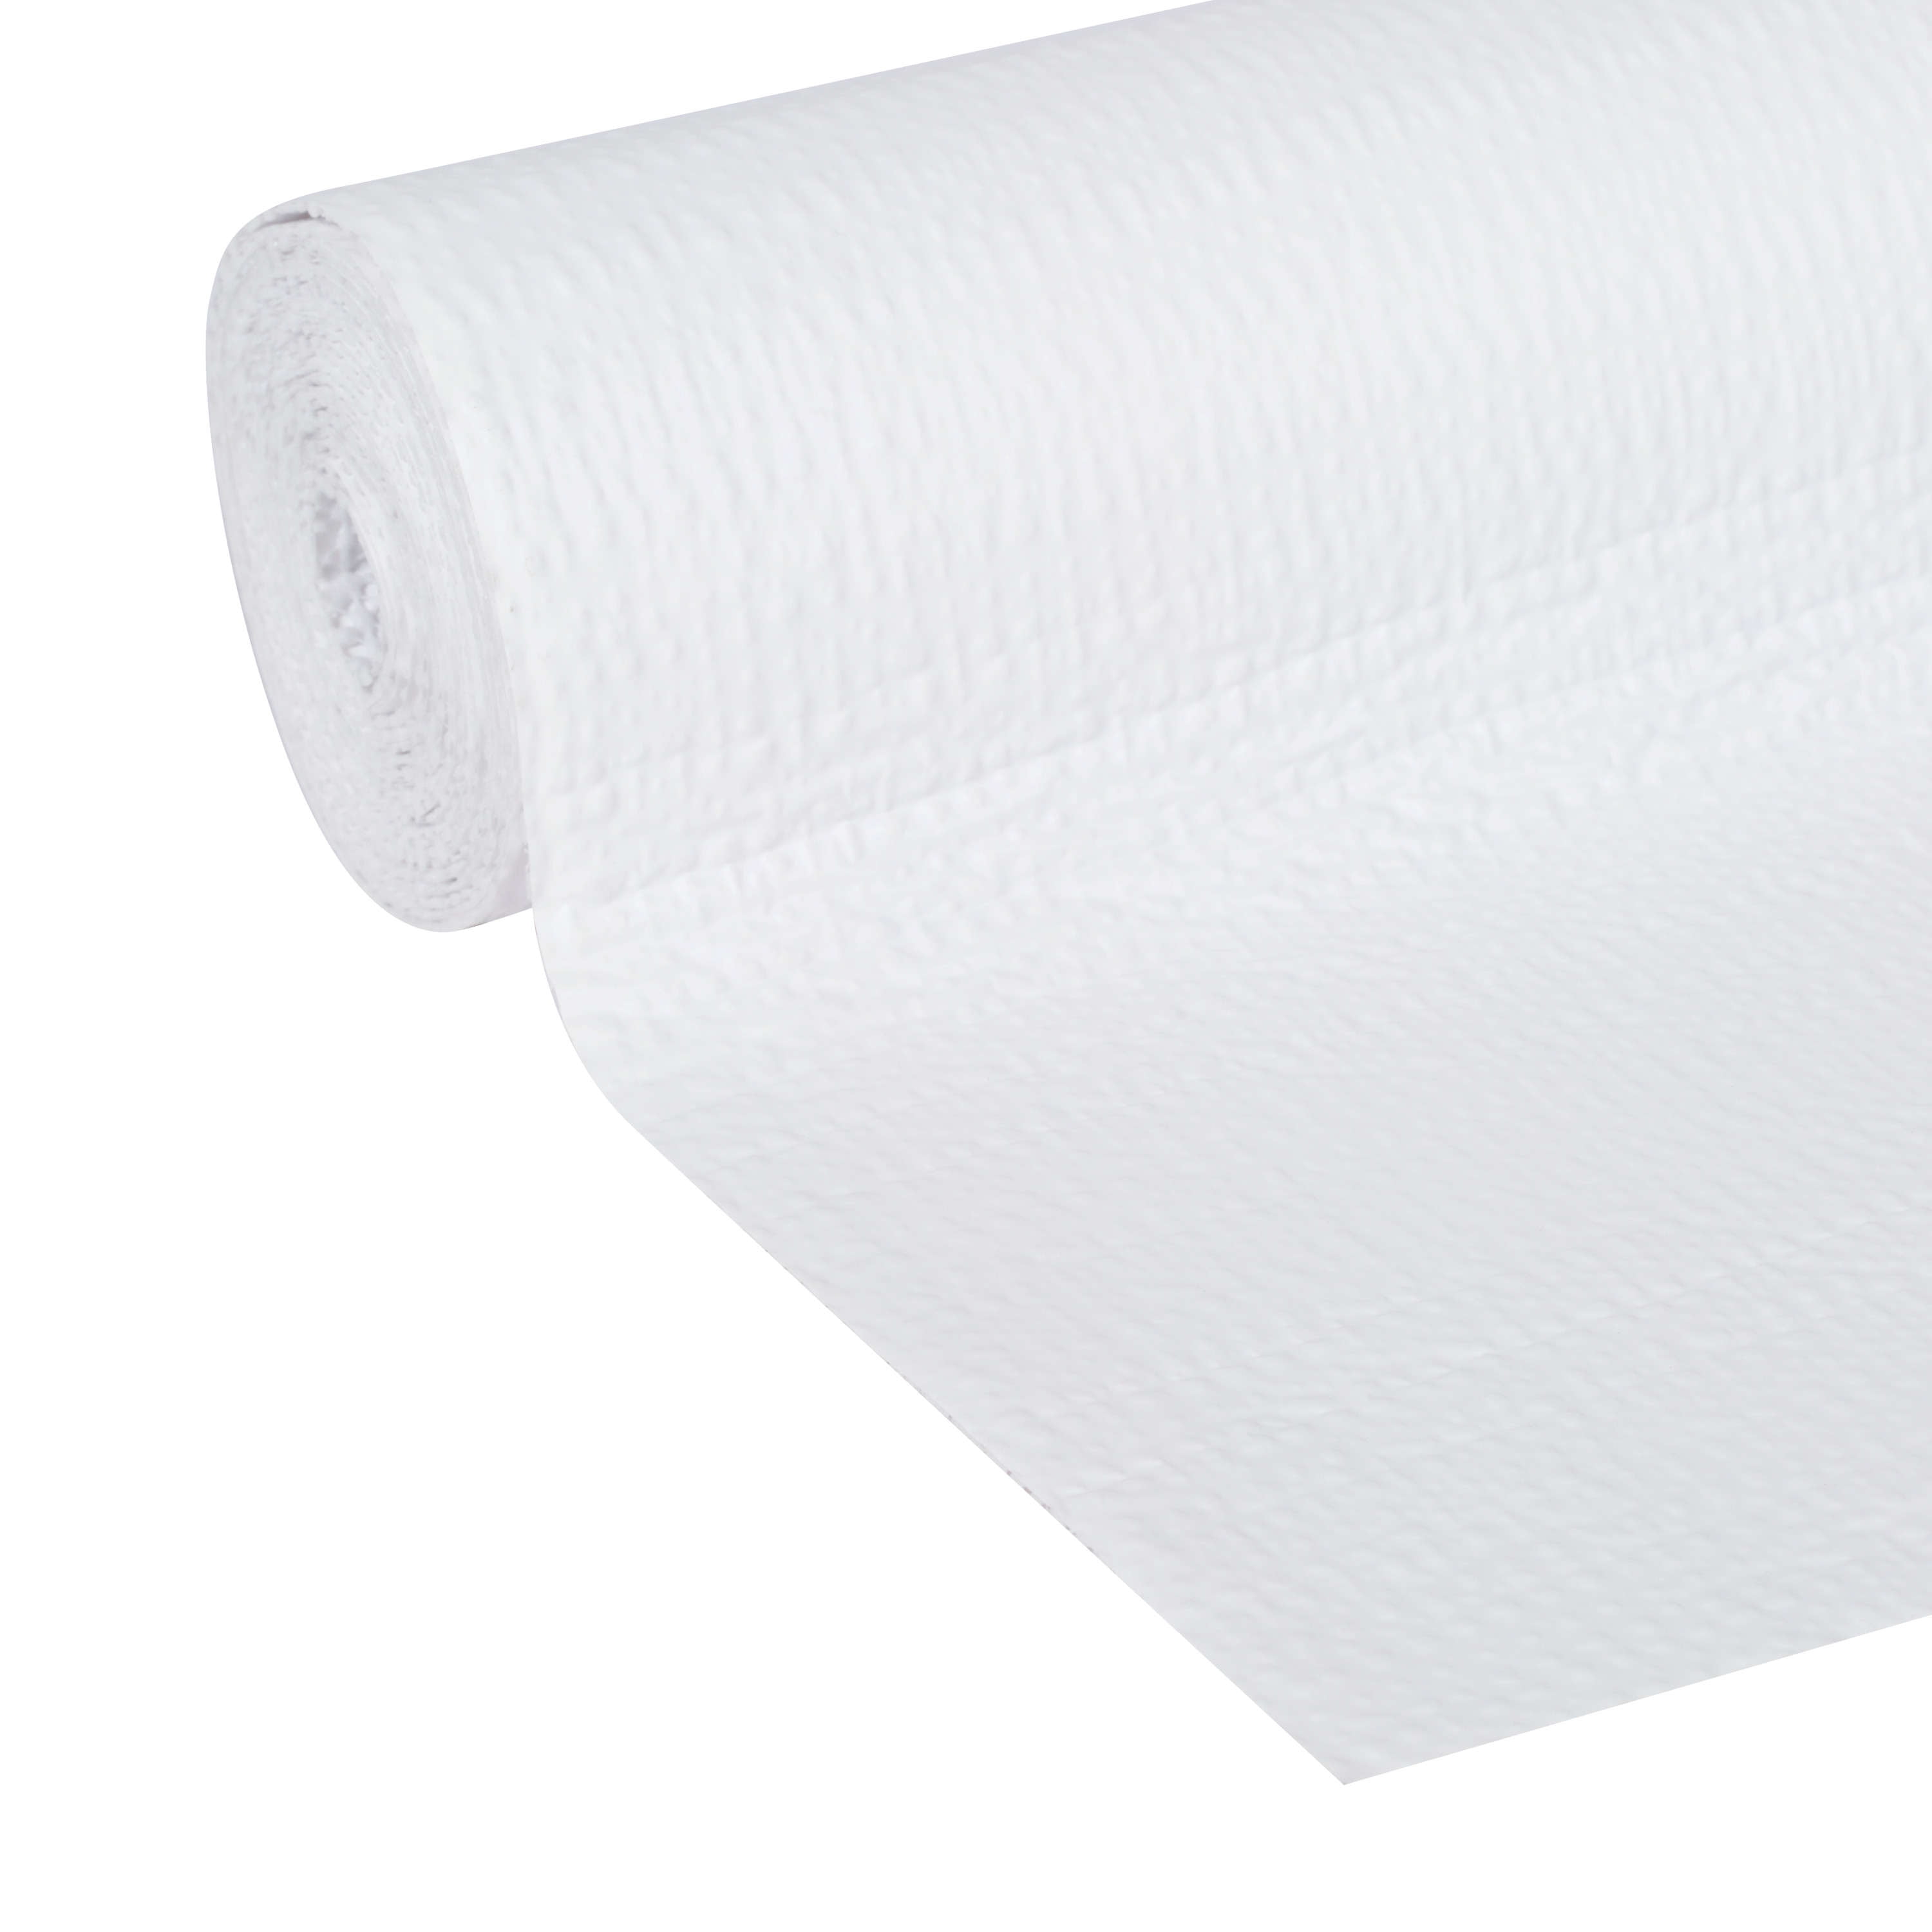 EasyLiner Smooth Top 12 In. x 10 Ft. Shelf Liner with Clorox, White